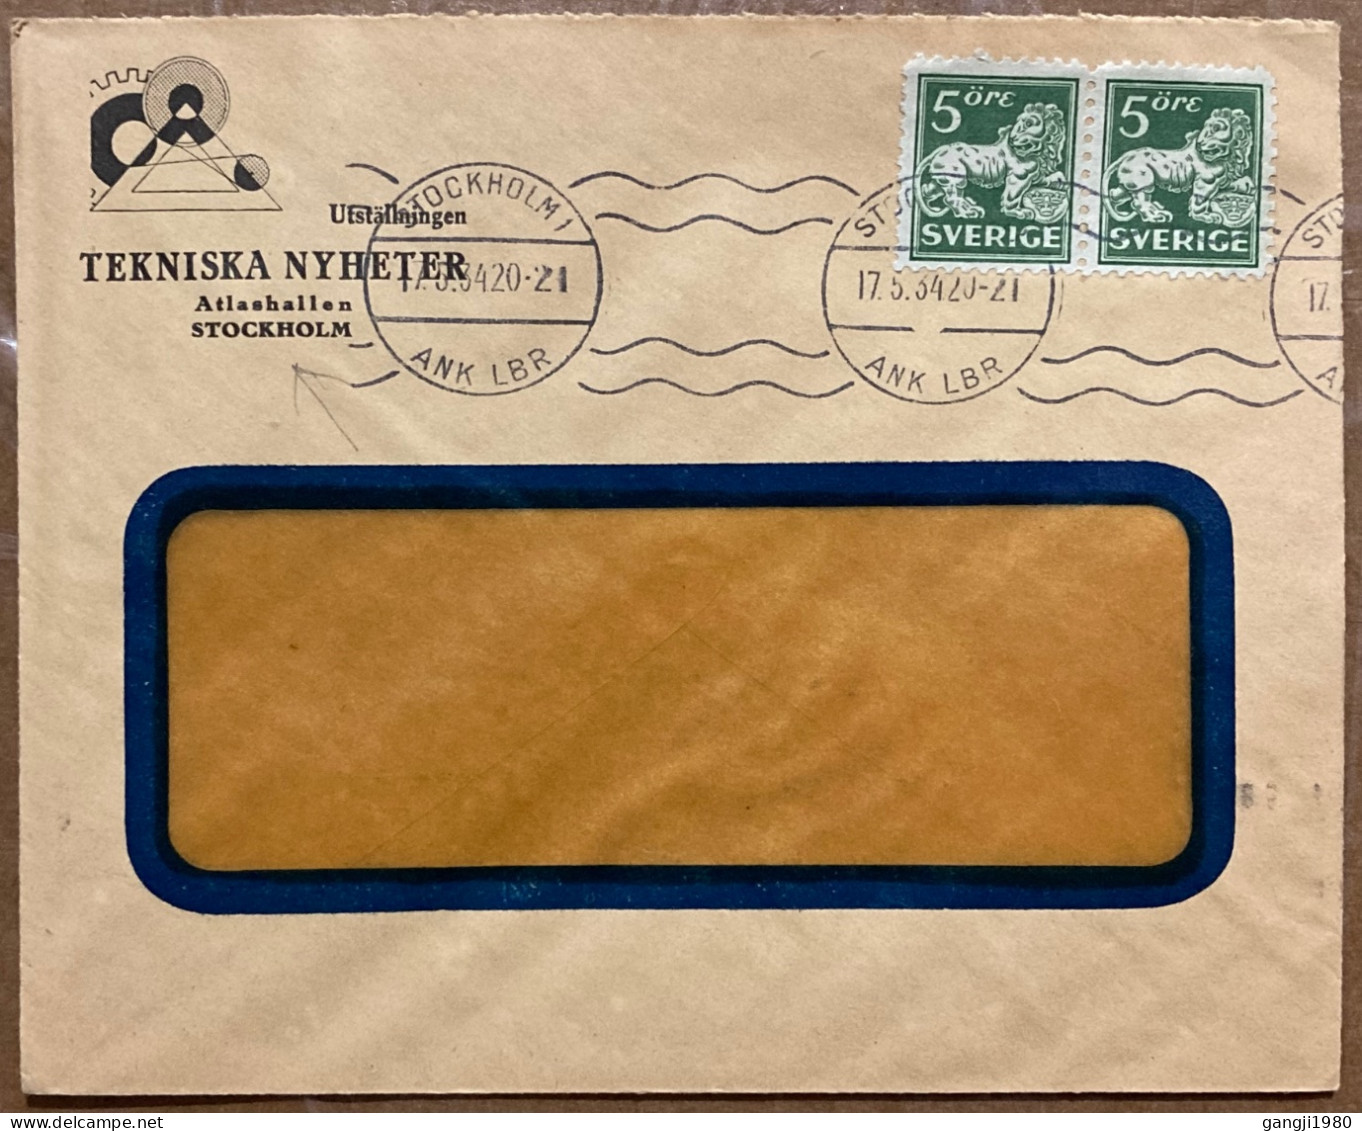 SWEDEN 1934, ADVERTISING COVER USED, TECHNICAL NEWS & EXHIBITION, STOCKHOLM CITY CANCEL, LION  2 STAMP. - Briefe U. Dokumente